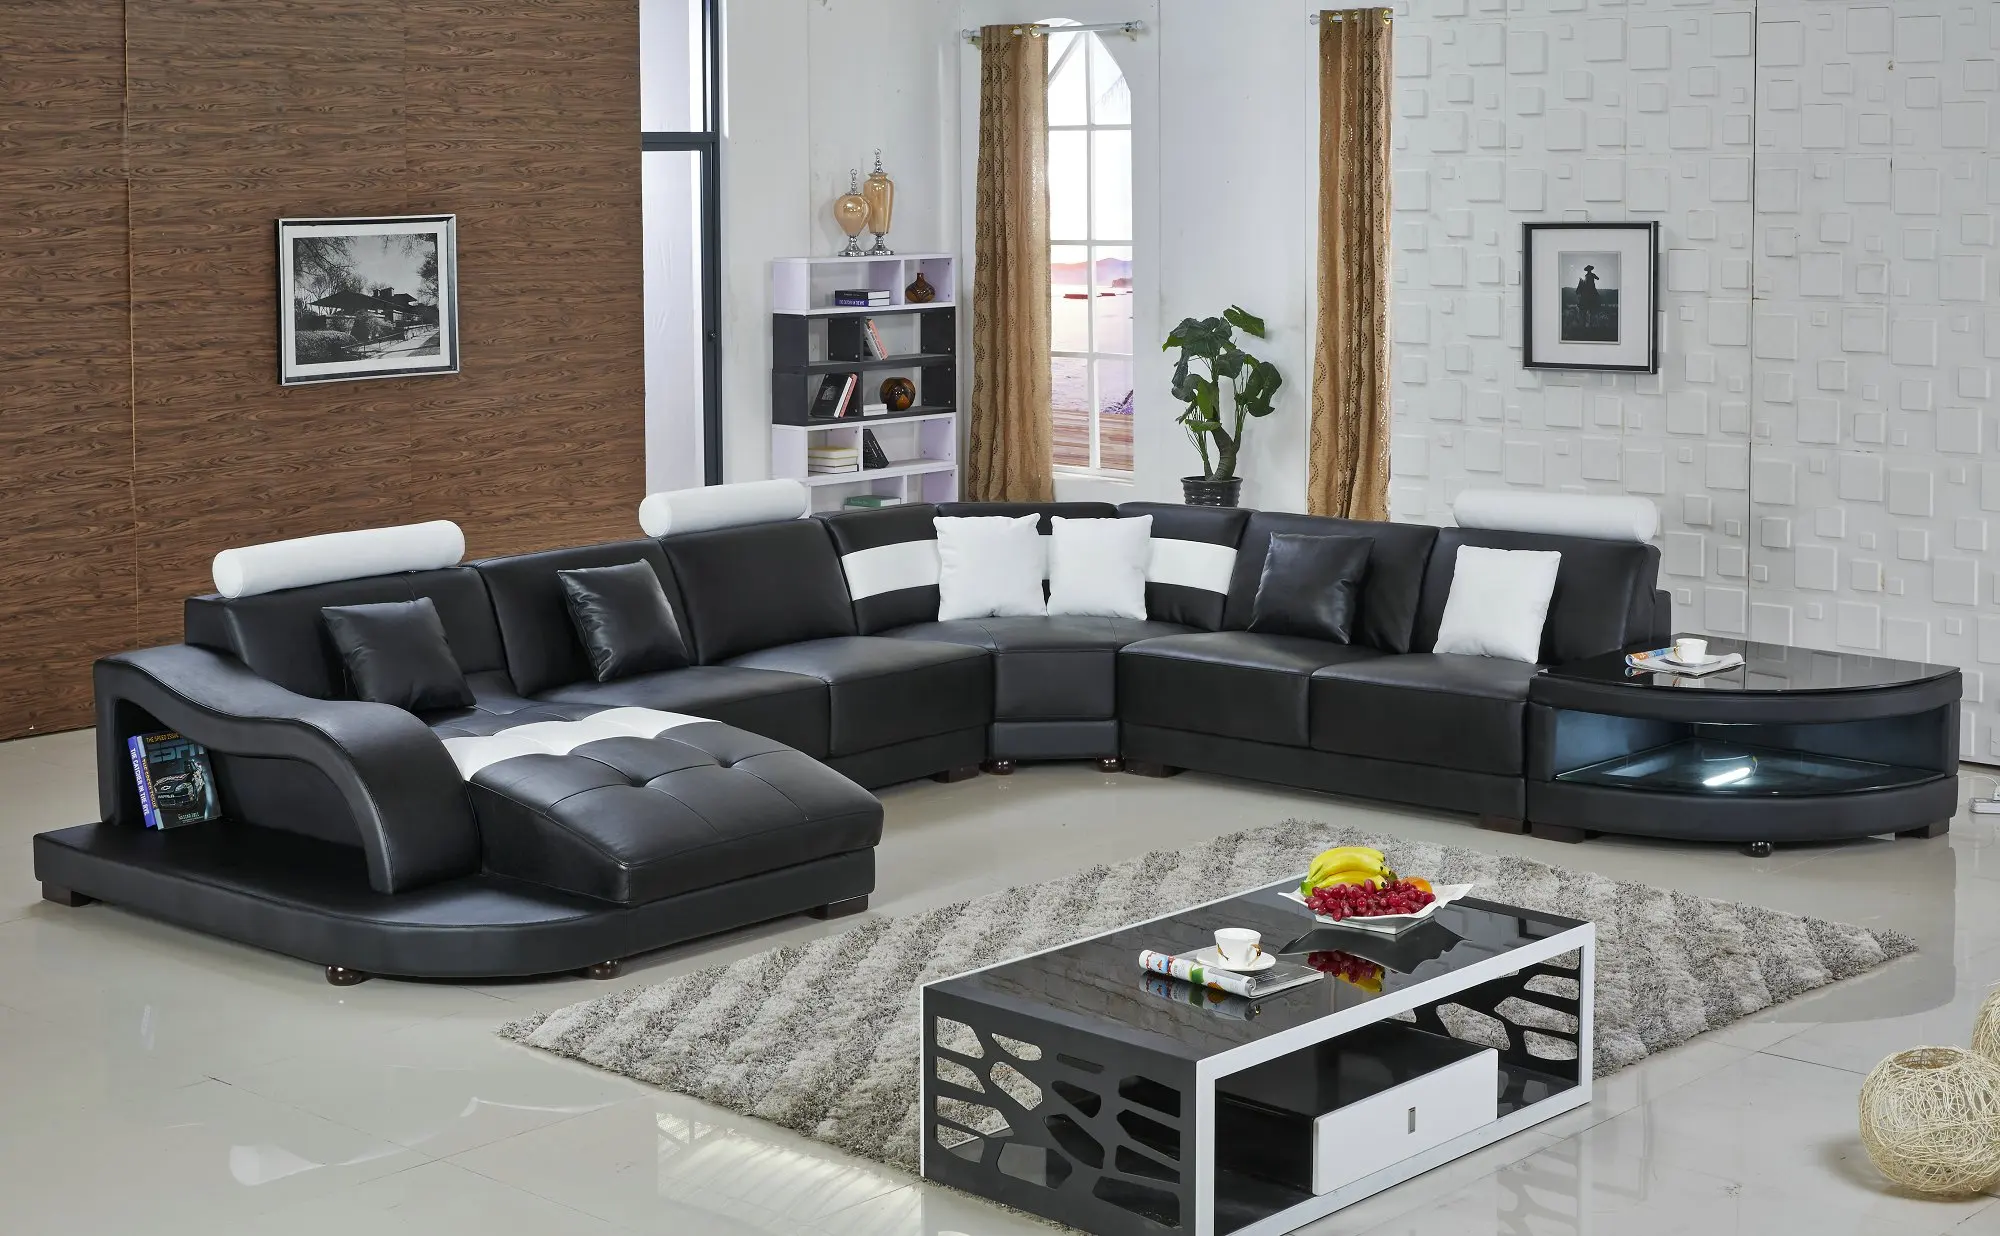 Guangzhou home furniture 7 seater sectional leather sofa with led light